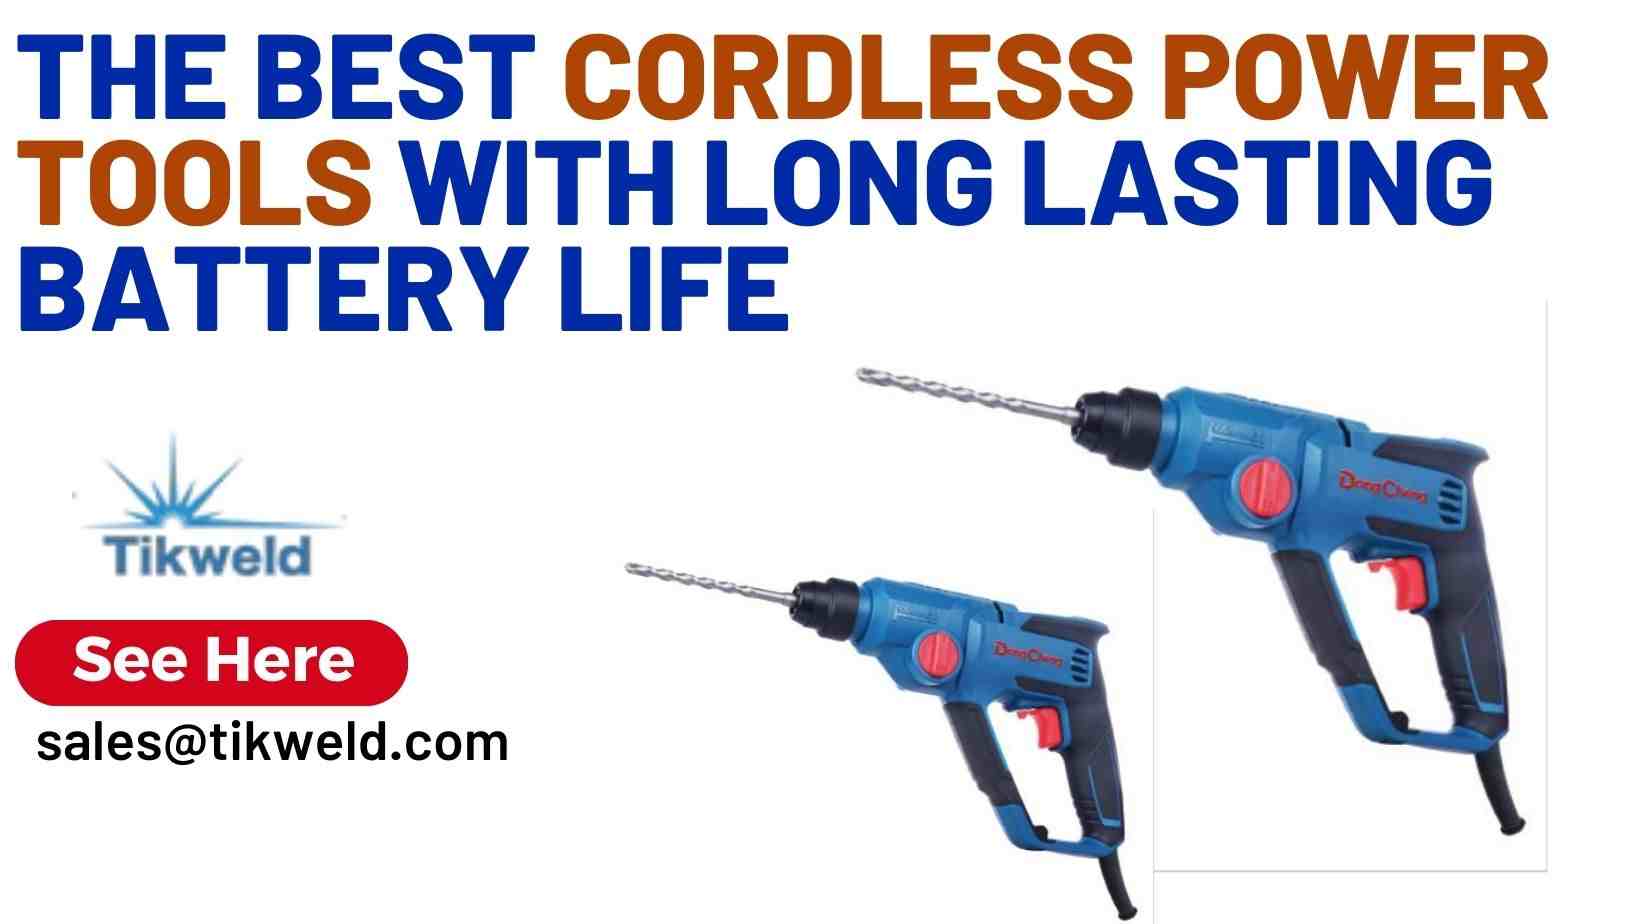 BOSCH Go Review - The Best Cordless Screwdriver? 